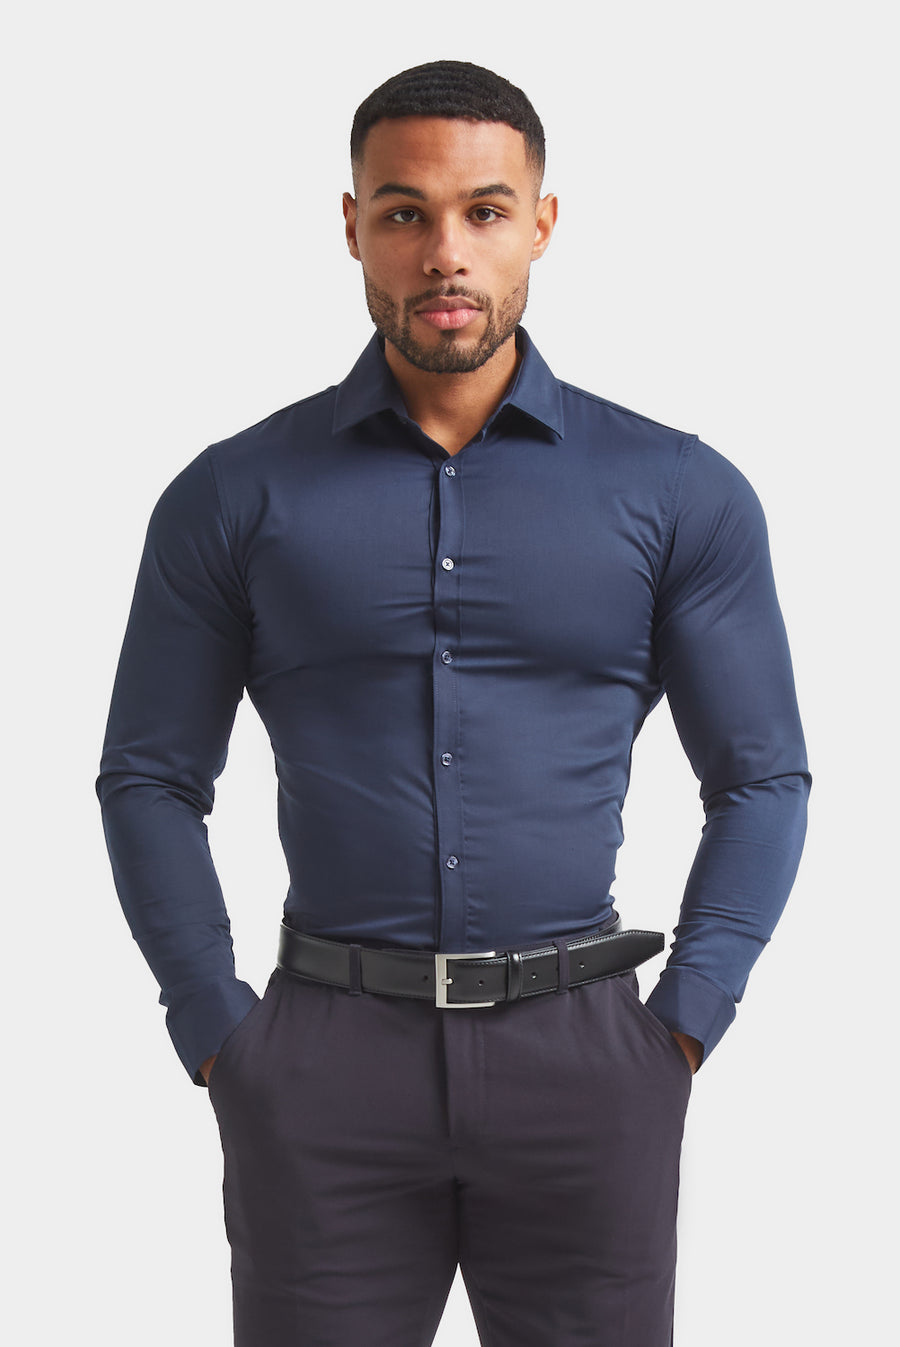 Athletic Fit Double Cuff Shirt in Black - TAILORED ATHLETE - USA